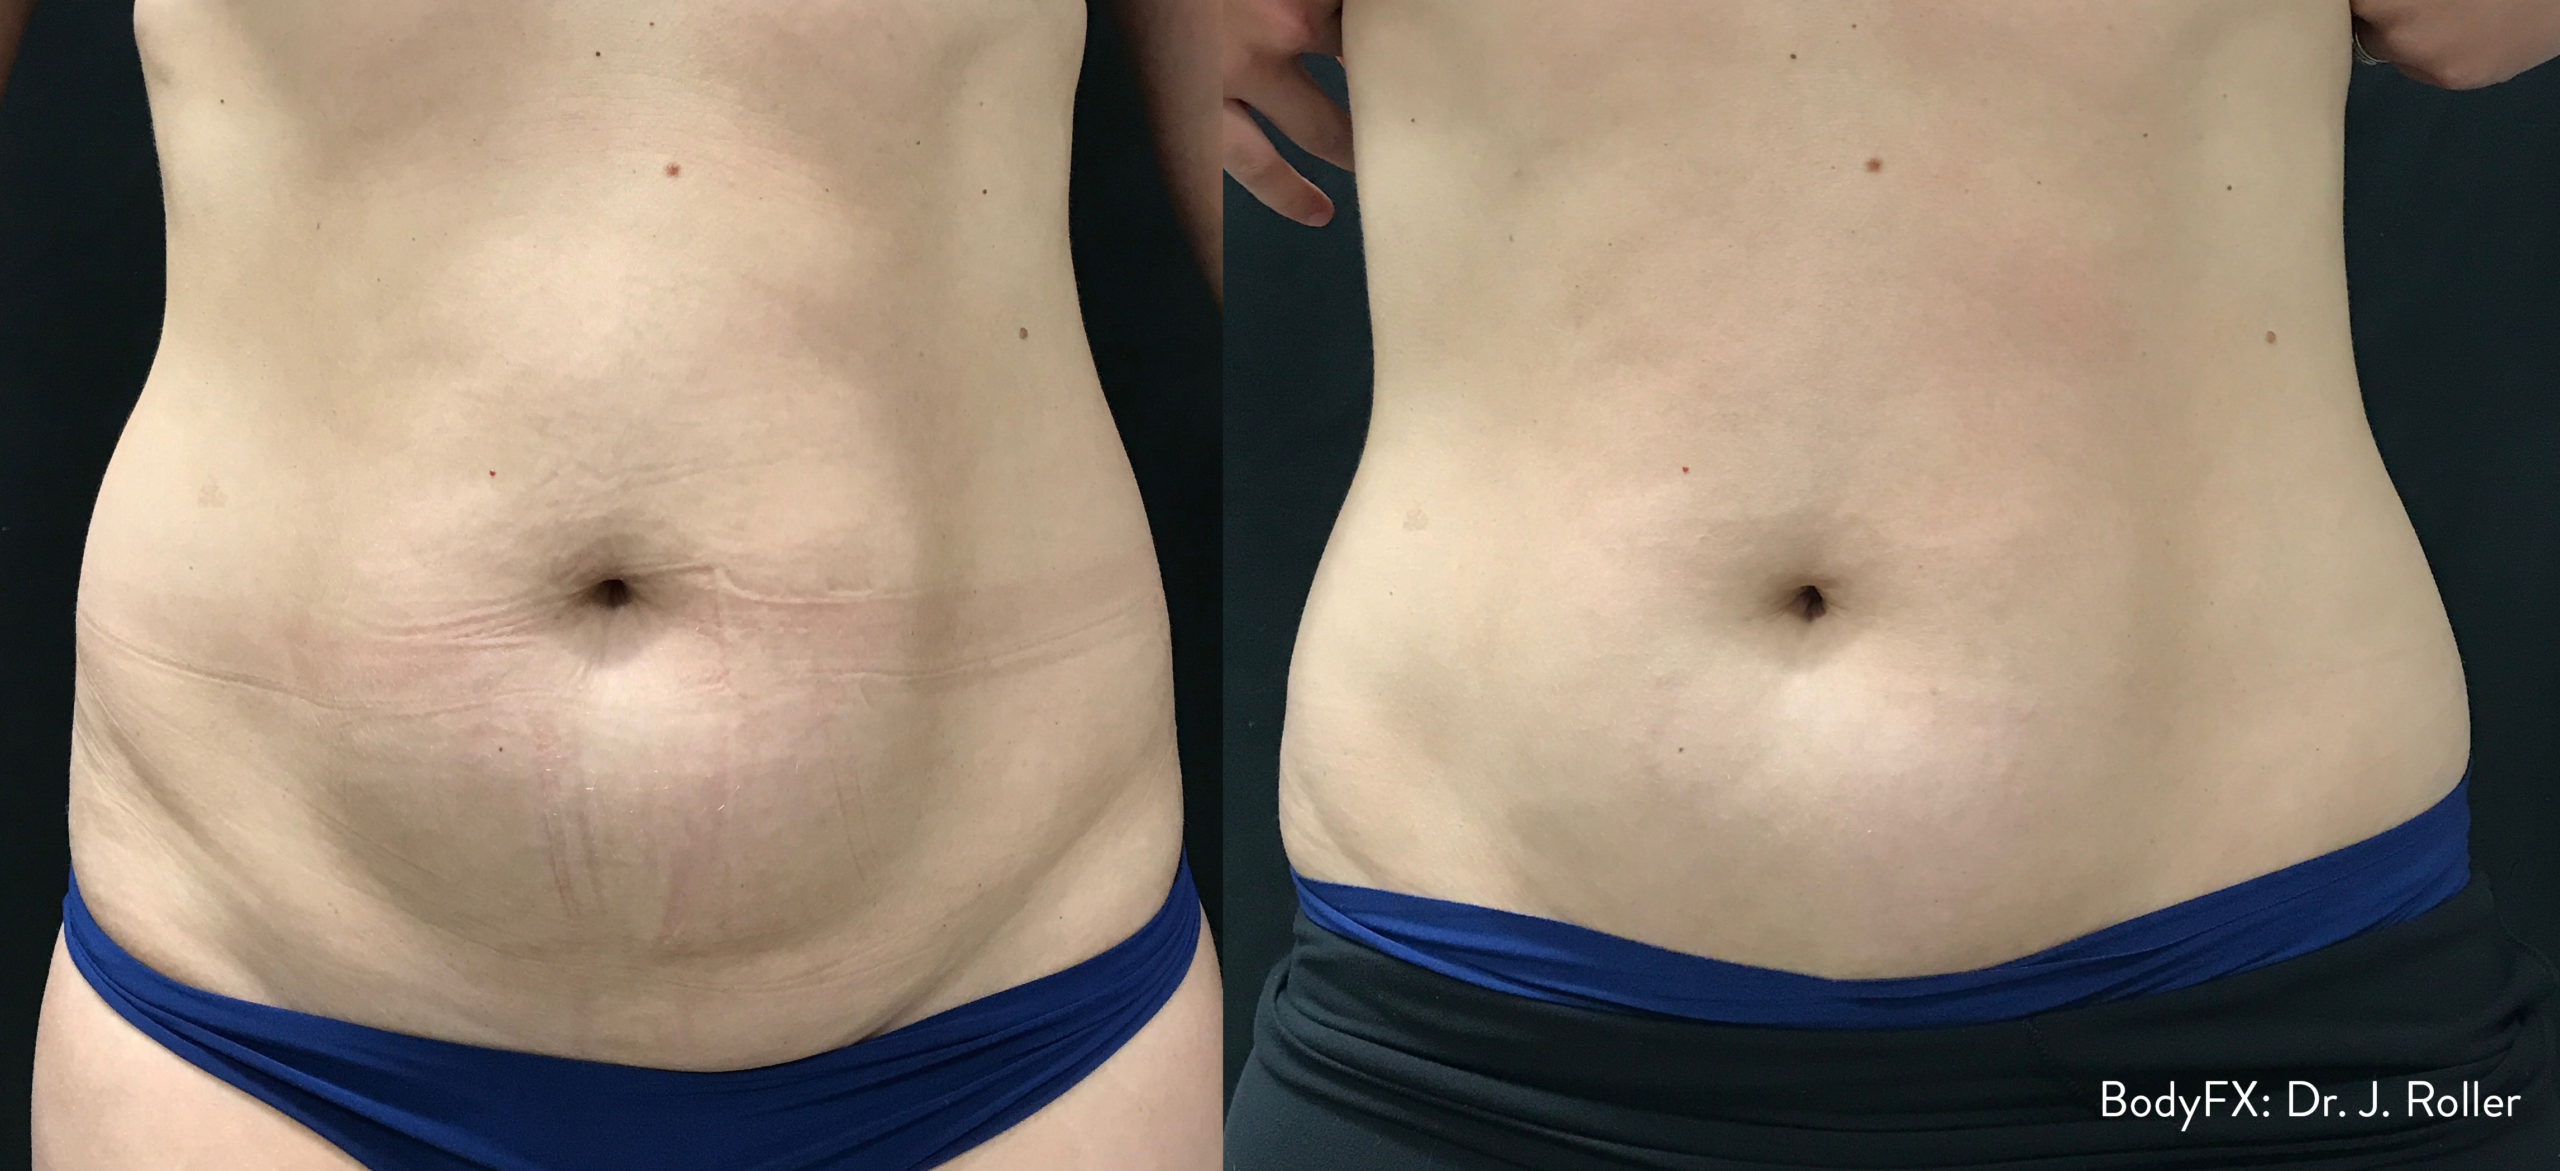 How Modern-Day Body Contouring Treatments Overtook Surgical